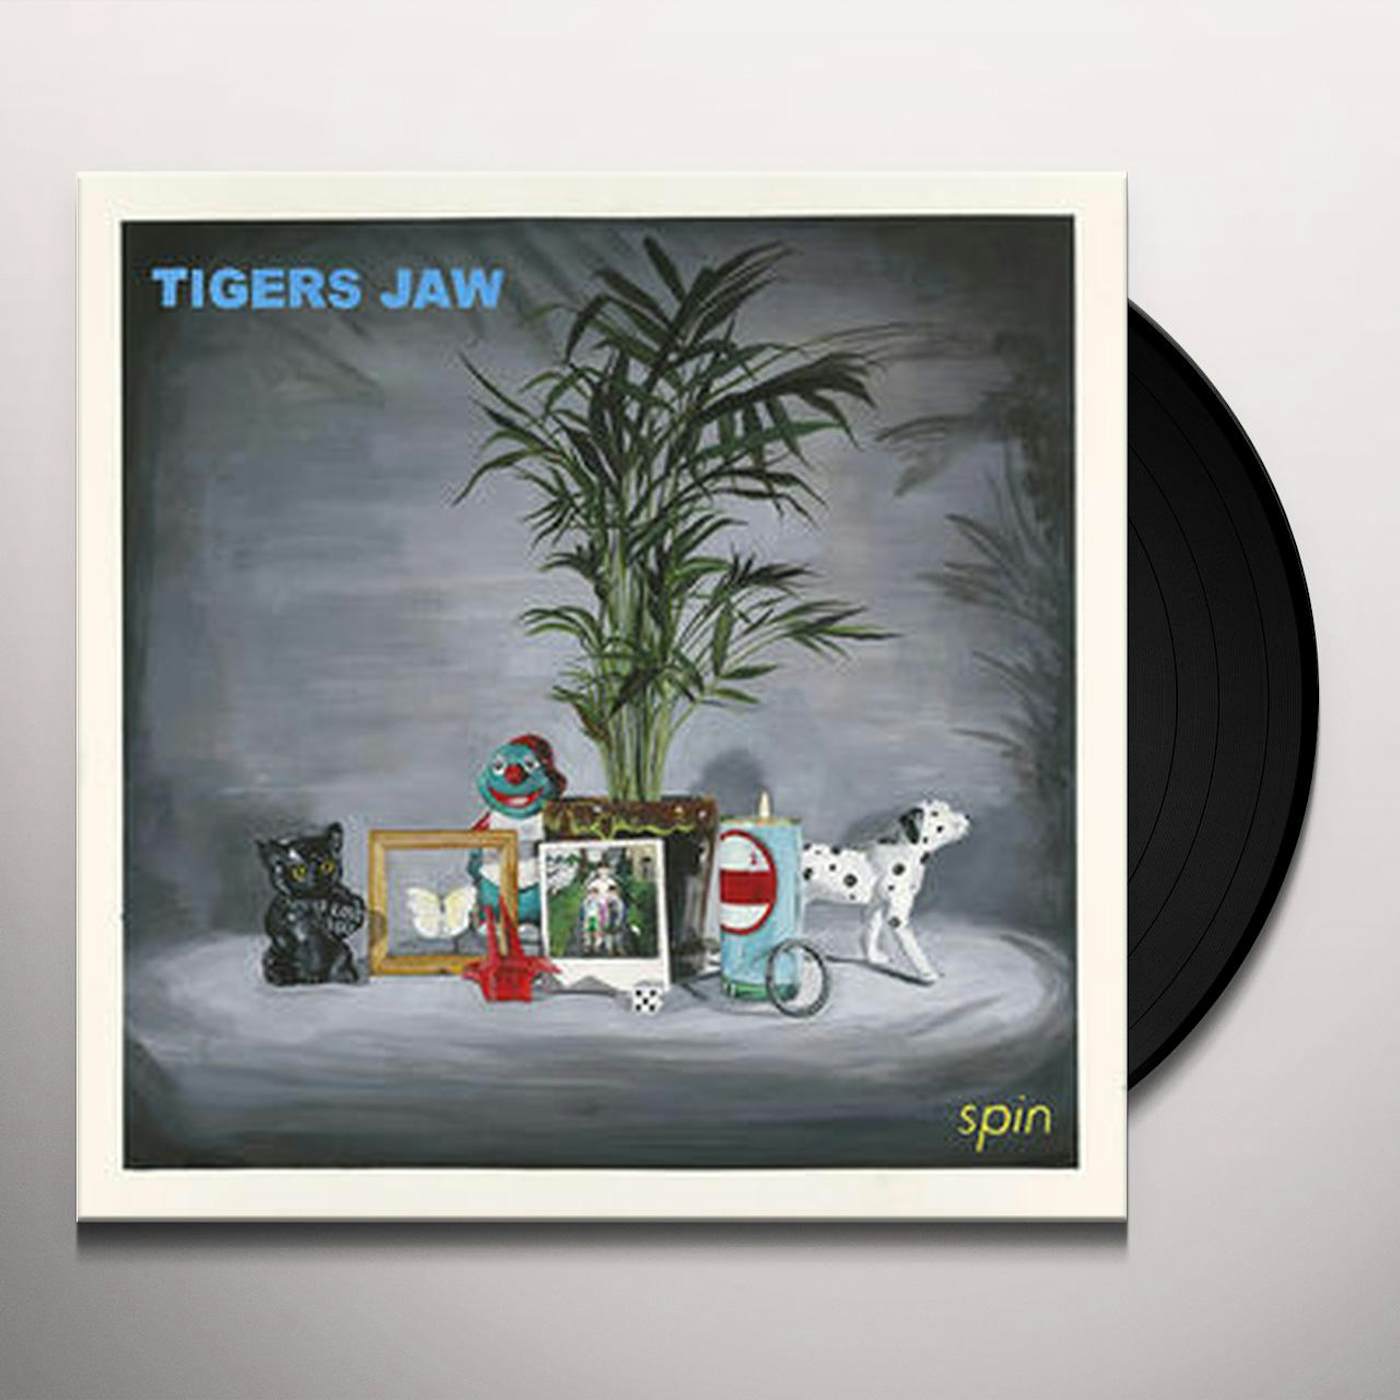 Tigers Jaw SPIN (TURQUOISE VINYL/DL CARD) Vinyl Record